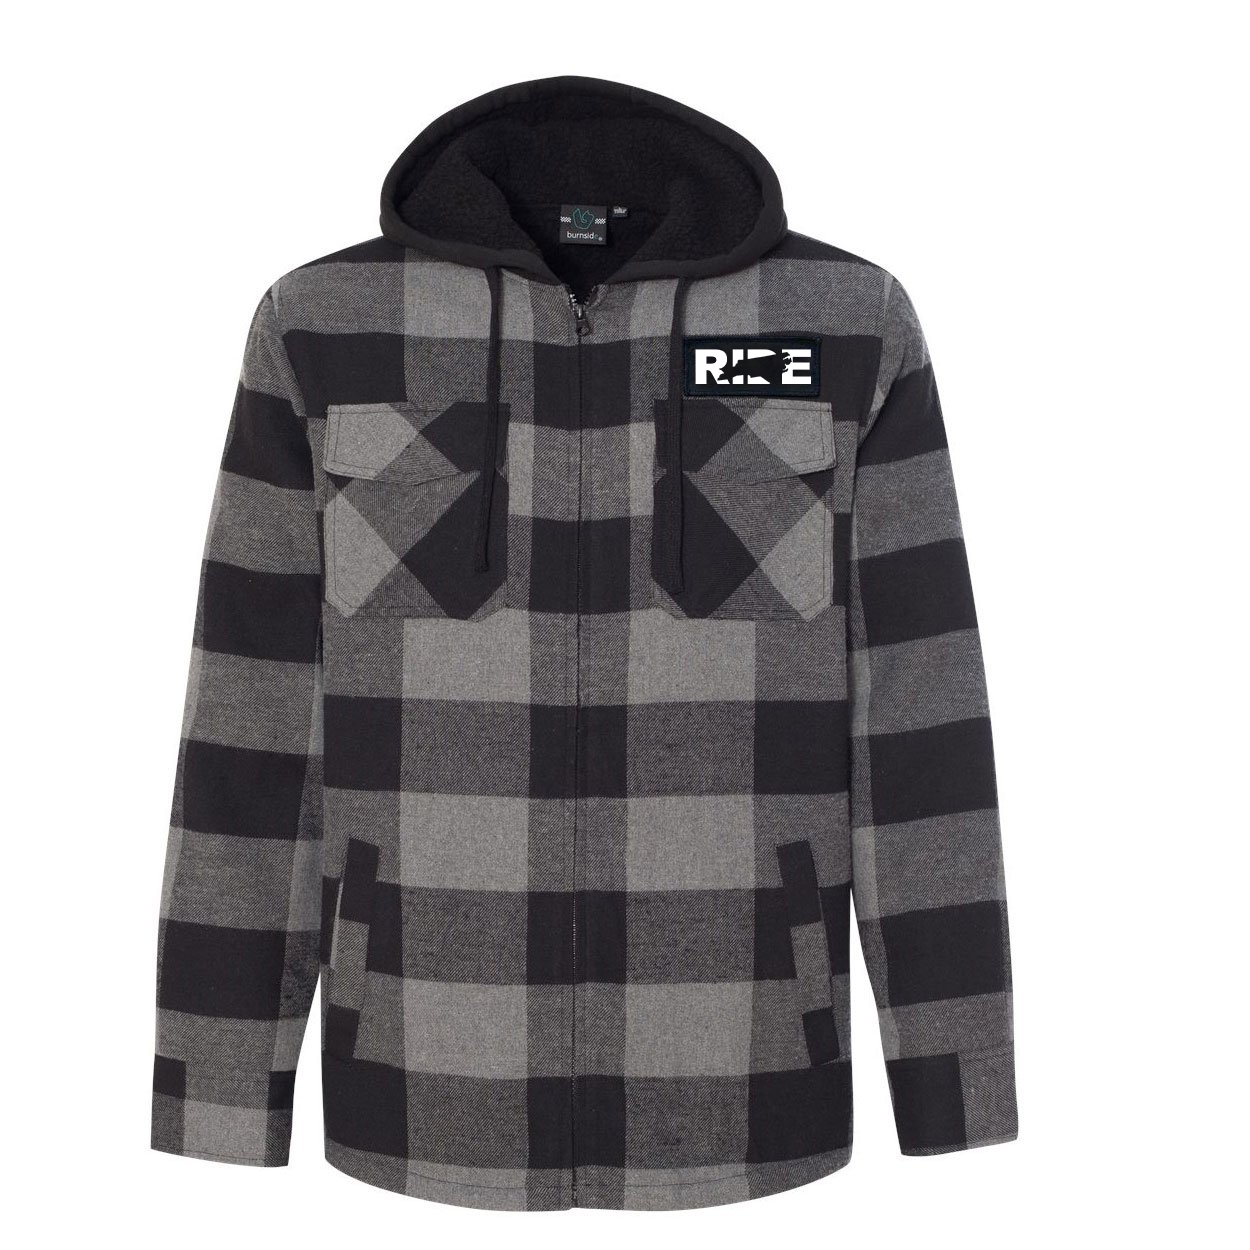 Ride North Carolina Classic Unisex Full Zip Woven Patch Hooded Flannel Jacket Black/Gray (White Logo)